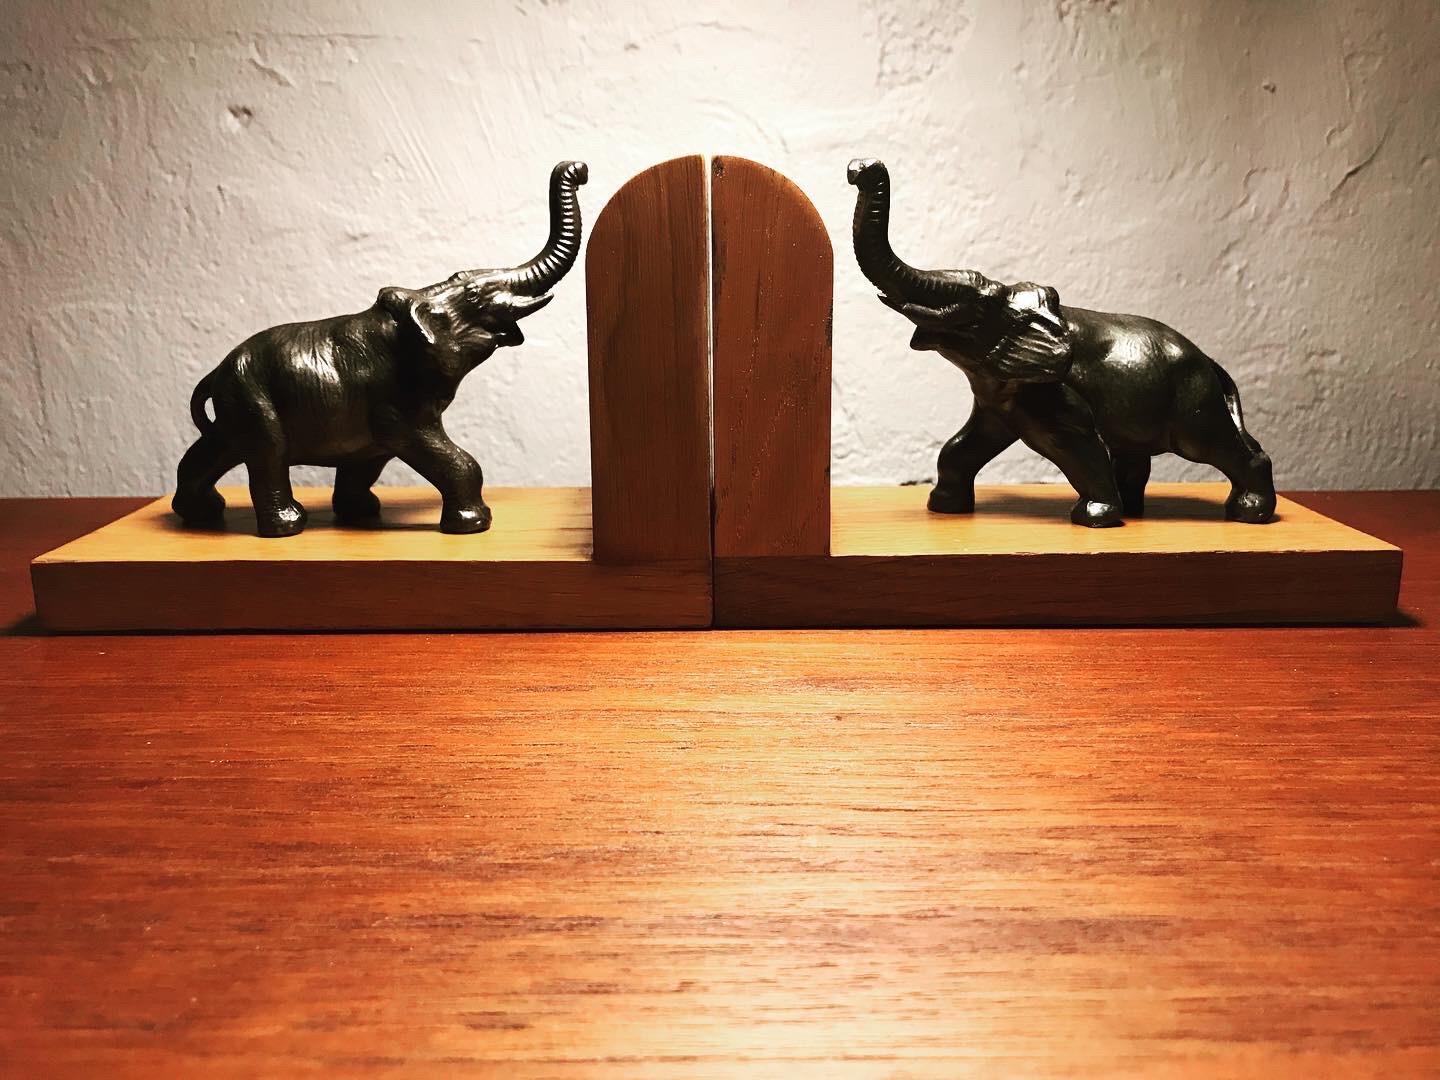 Amazing Pair of Art Deco Elephant Book Ends from the 1930s 9